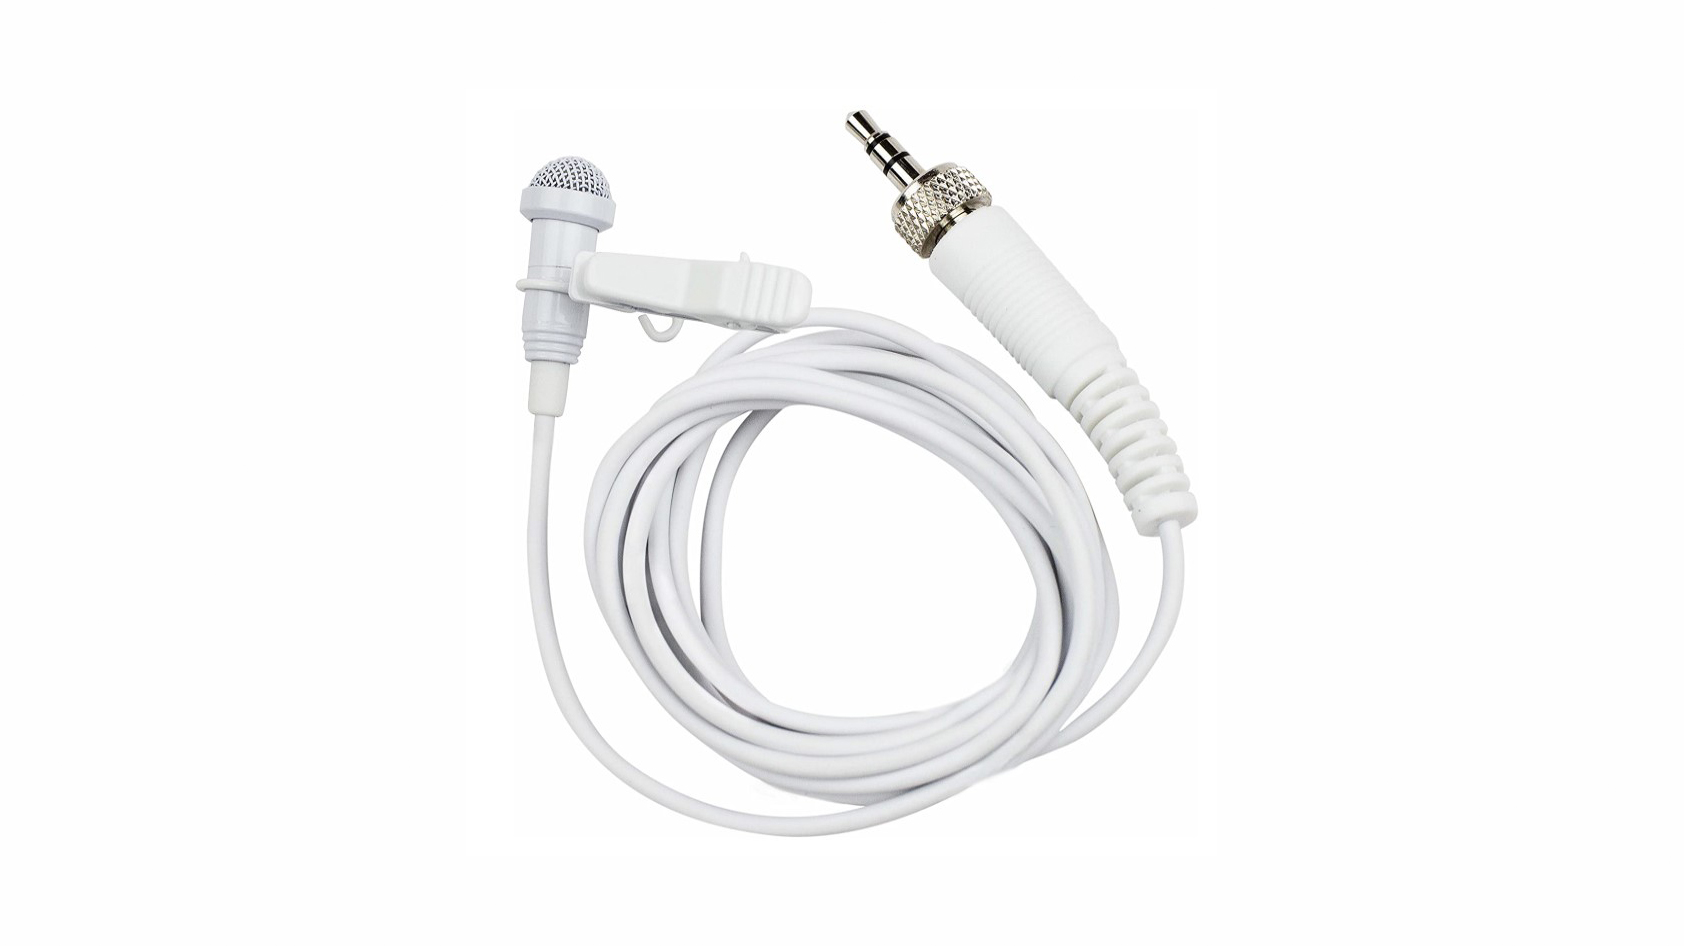 Set on a white background is the Tascam DR-10L lavalier microphone with its clip.